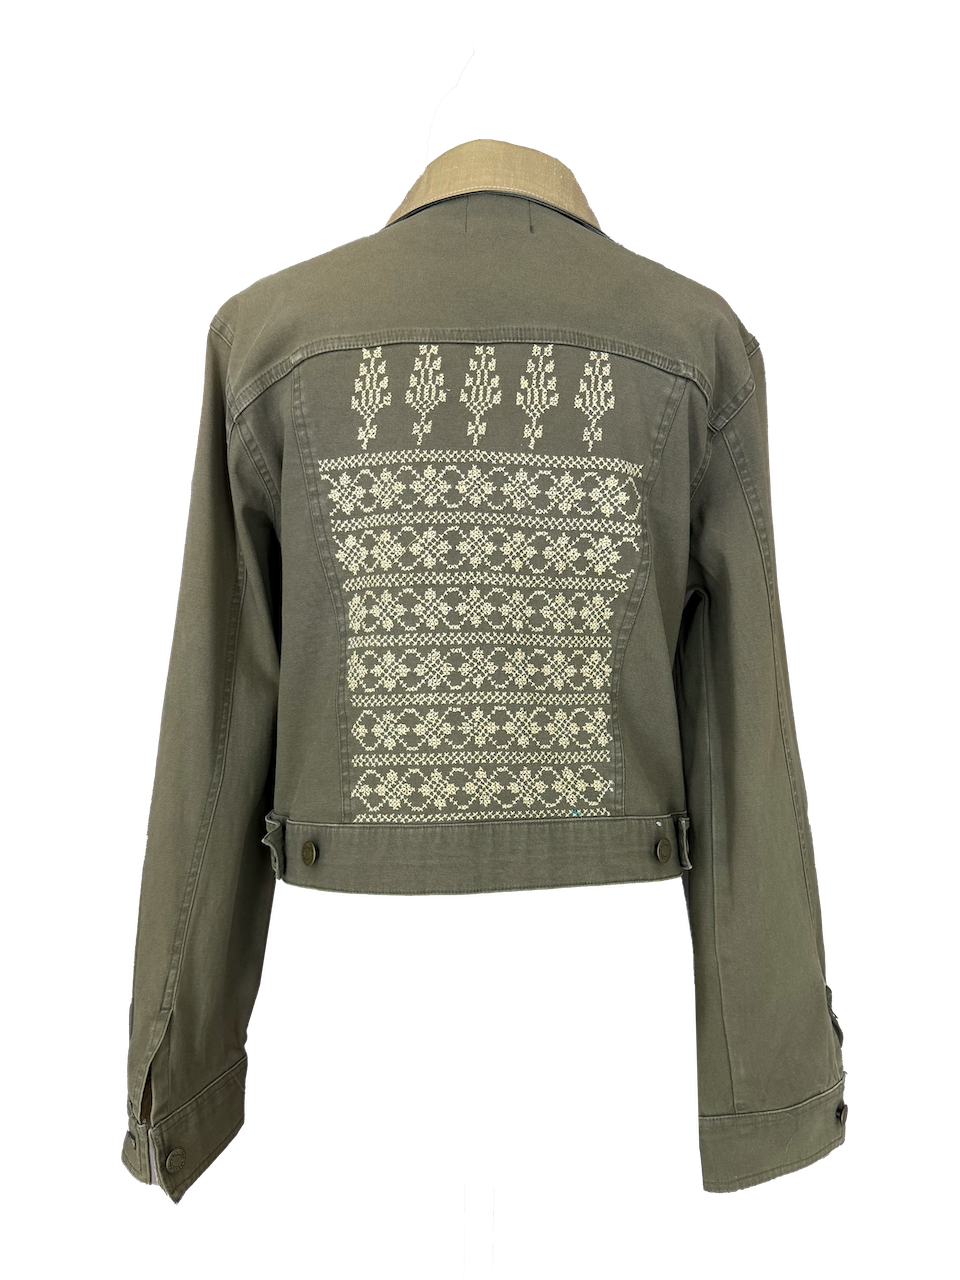 The Heavily Embroidered Denim Jacket in Olive Green With Raw Silk